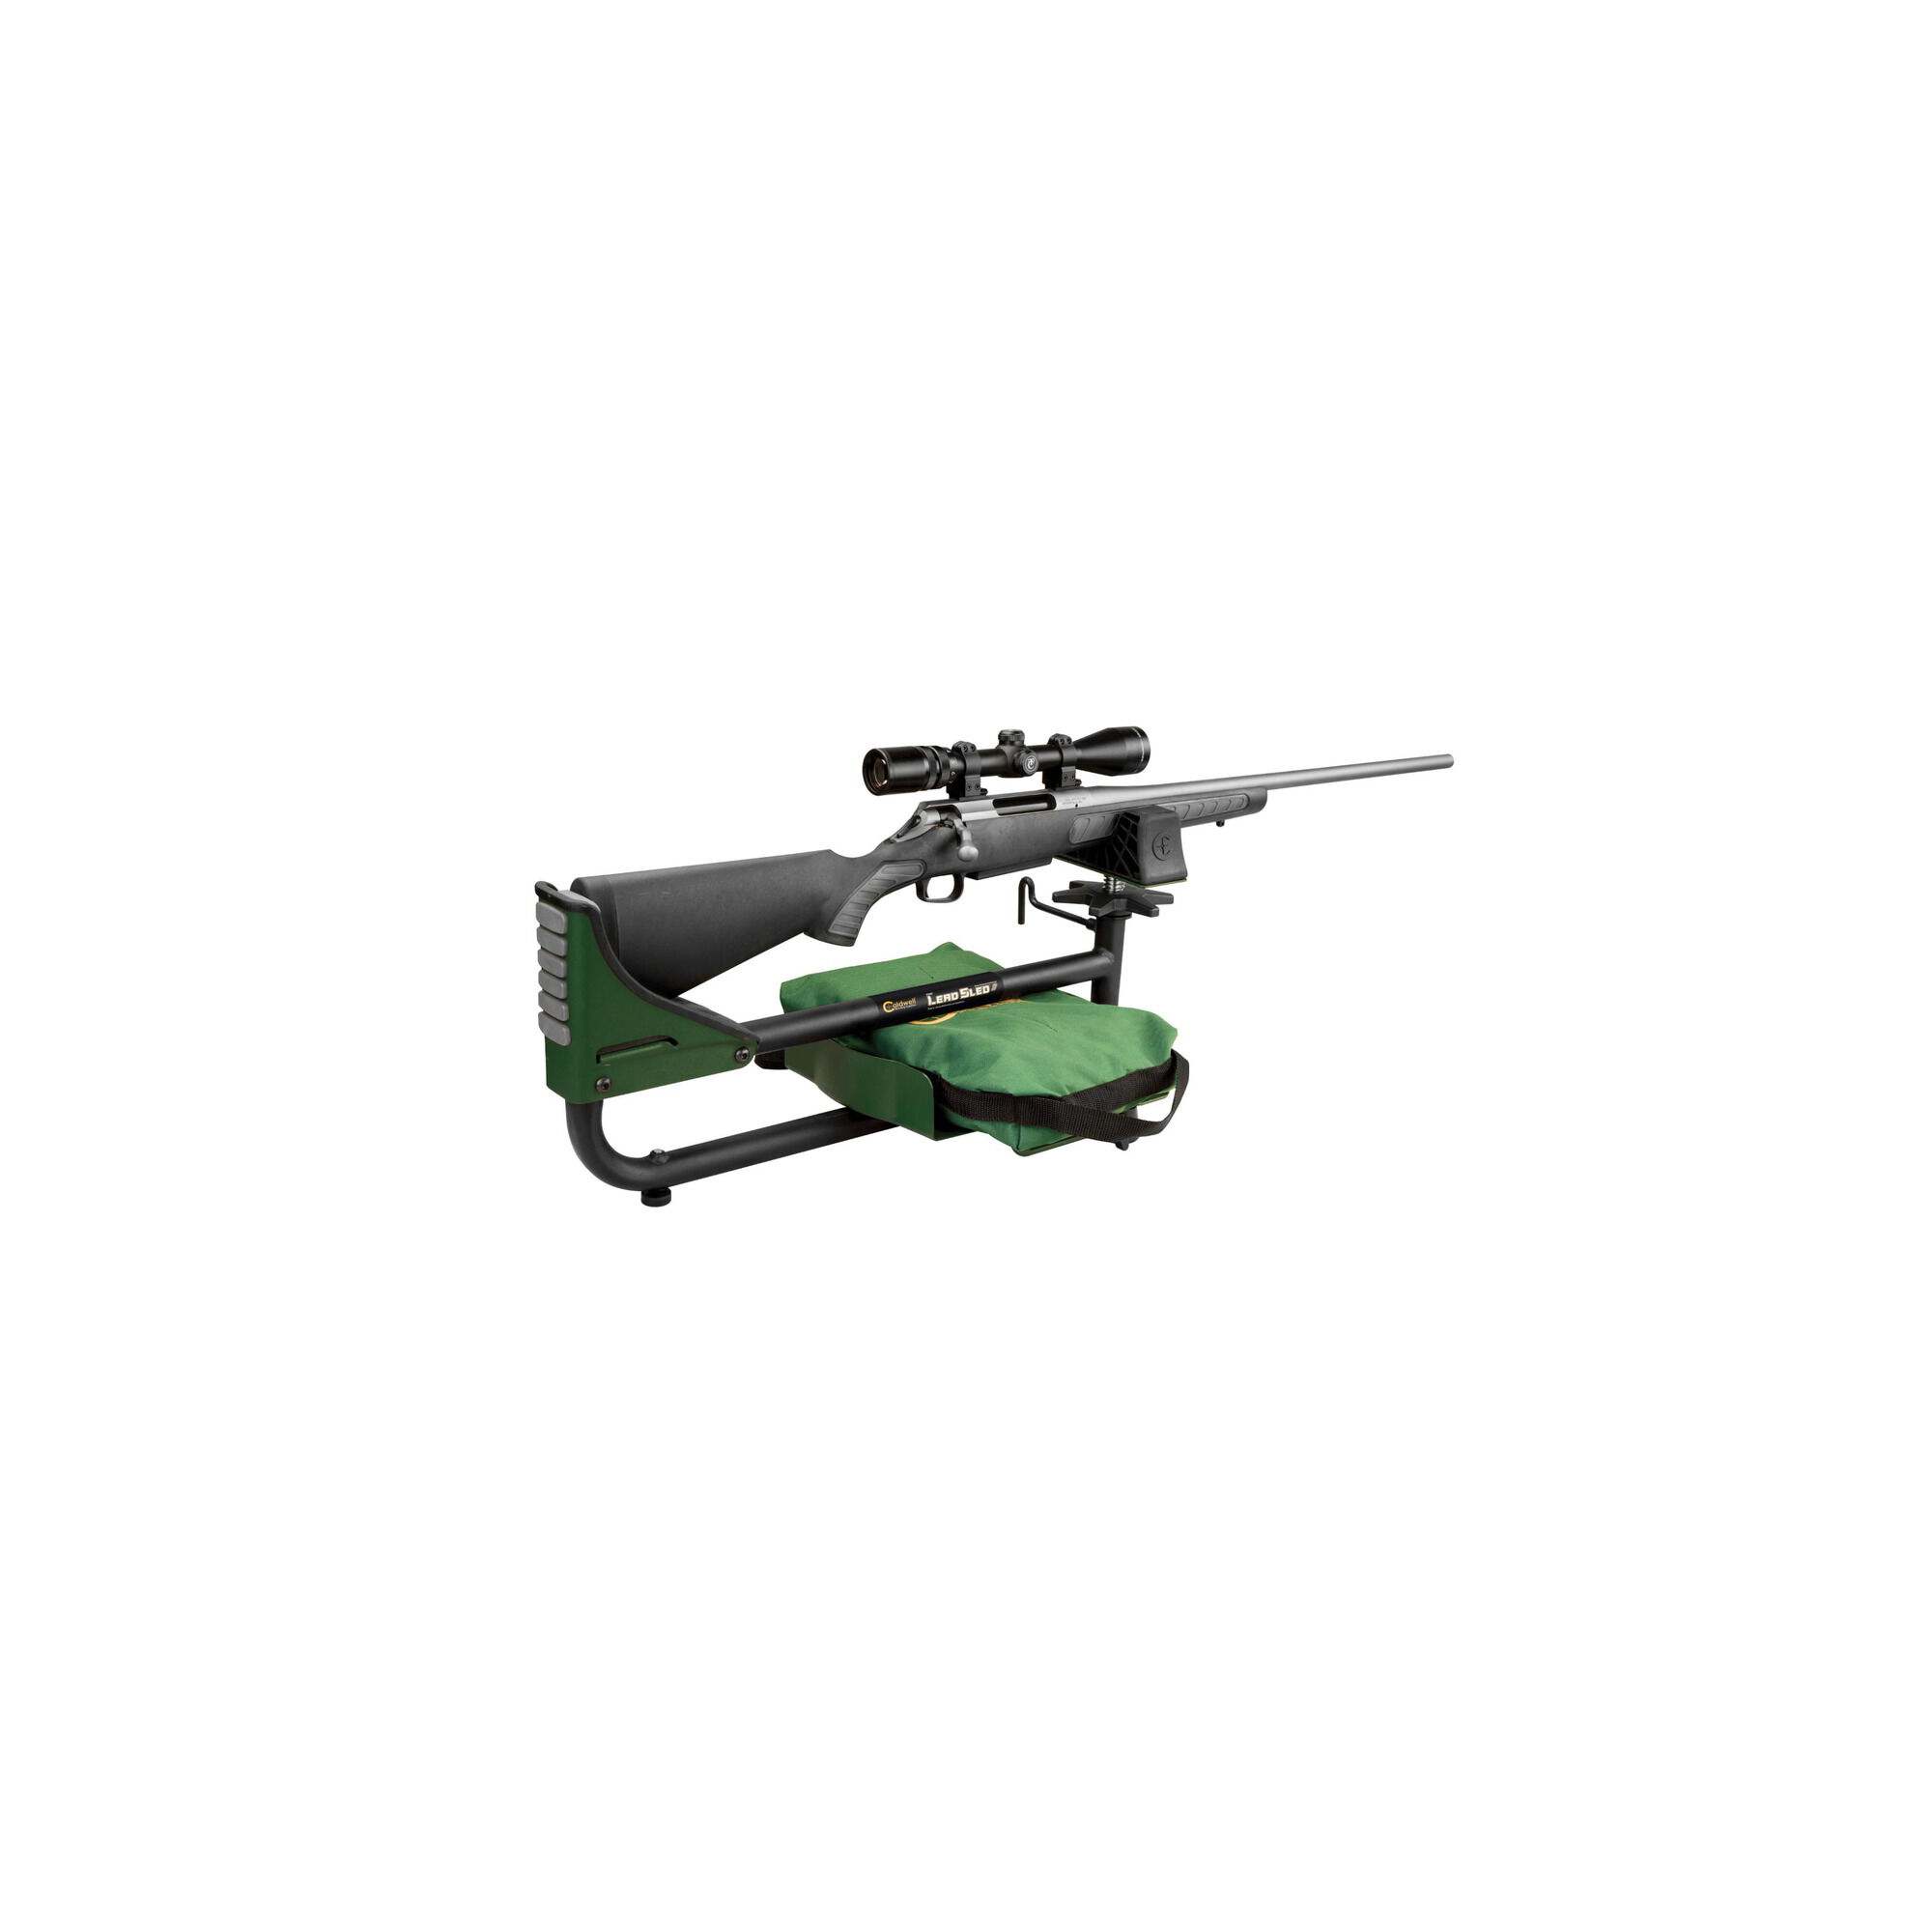 Caldwell 820310 Lead Sled 3 Rifle Shooting Rest for sale online 